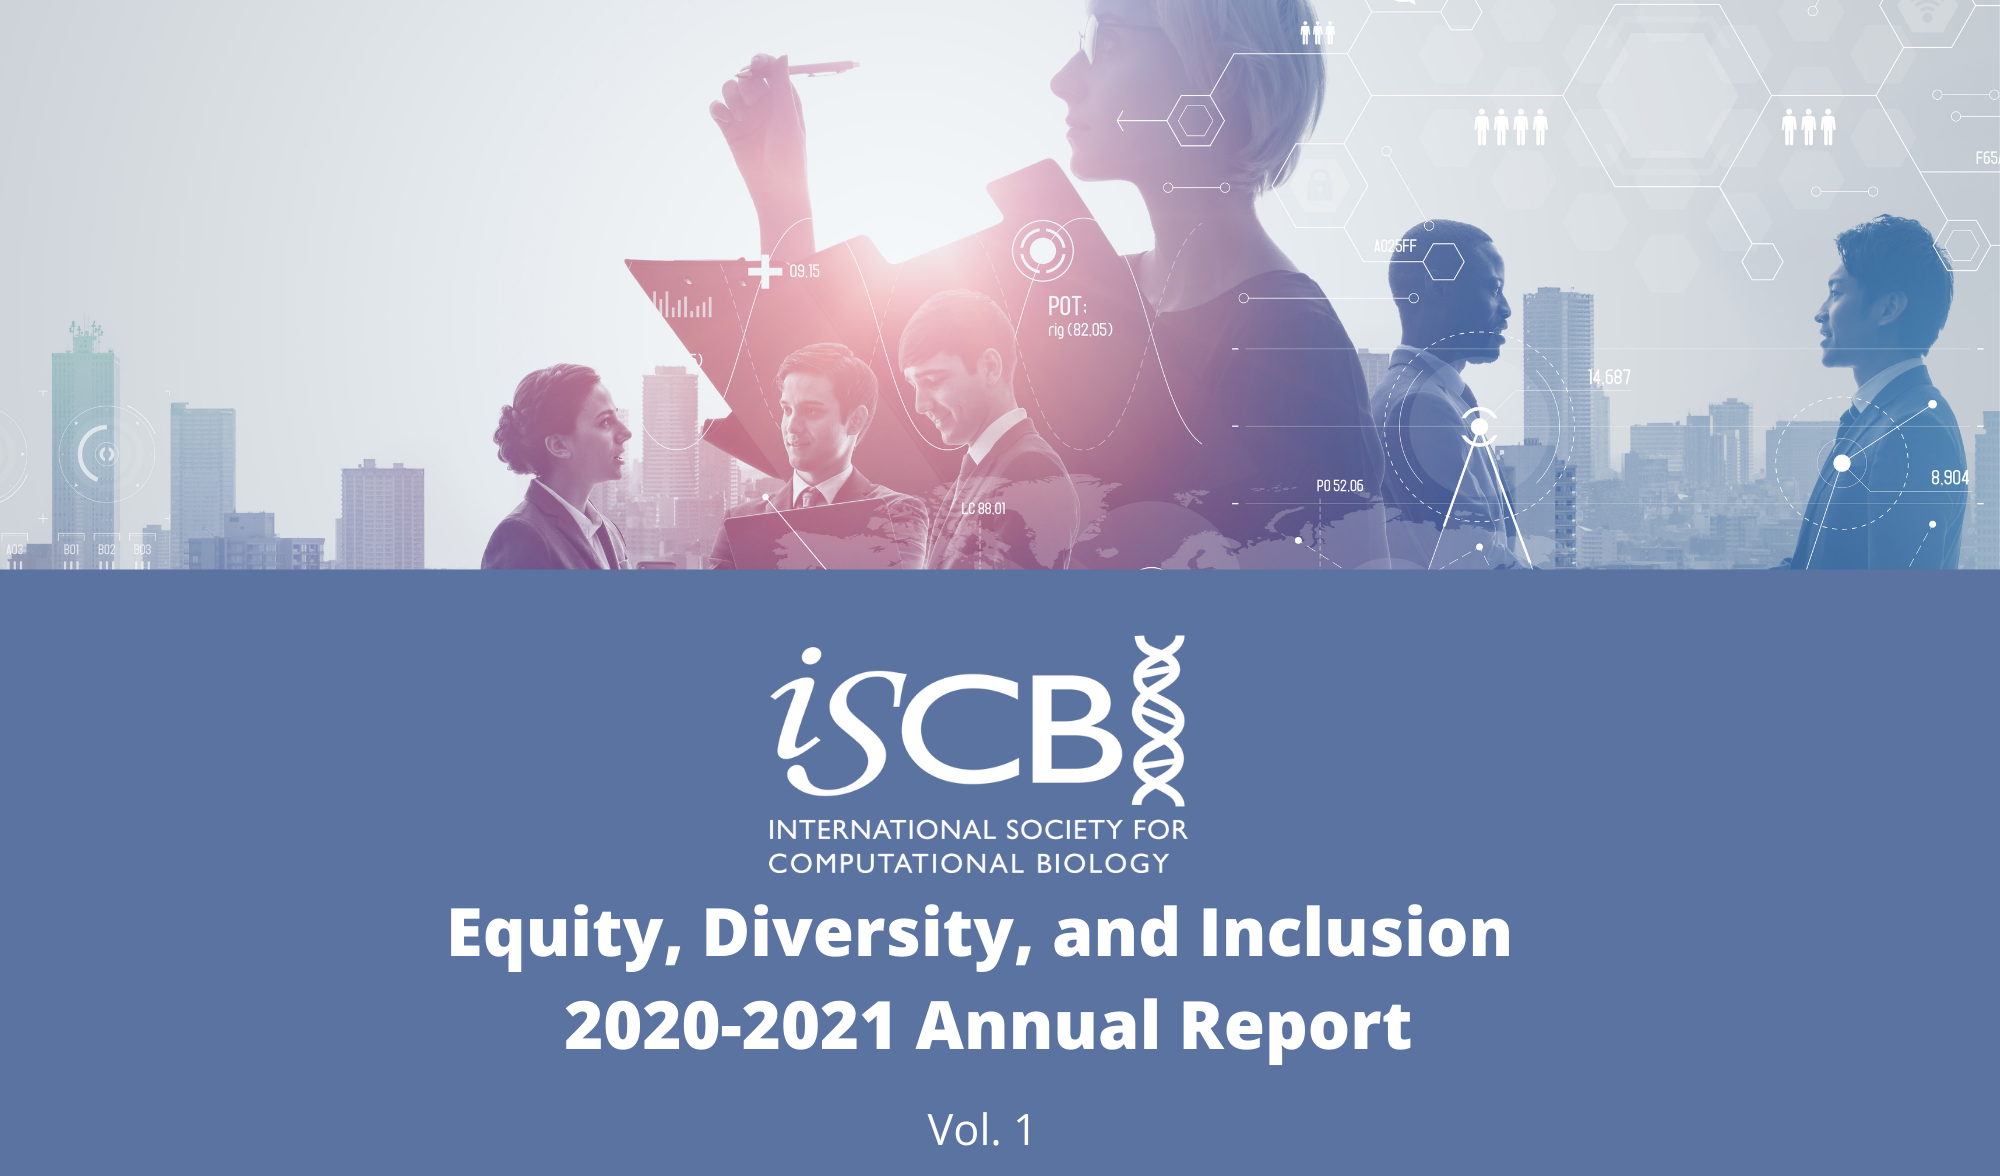 ISCB EQUITY DIVERSITY AND INCLUSION  2020-2021 ANNUAL REPORT